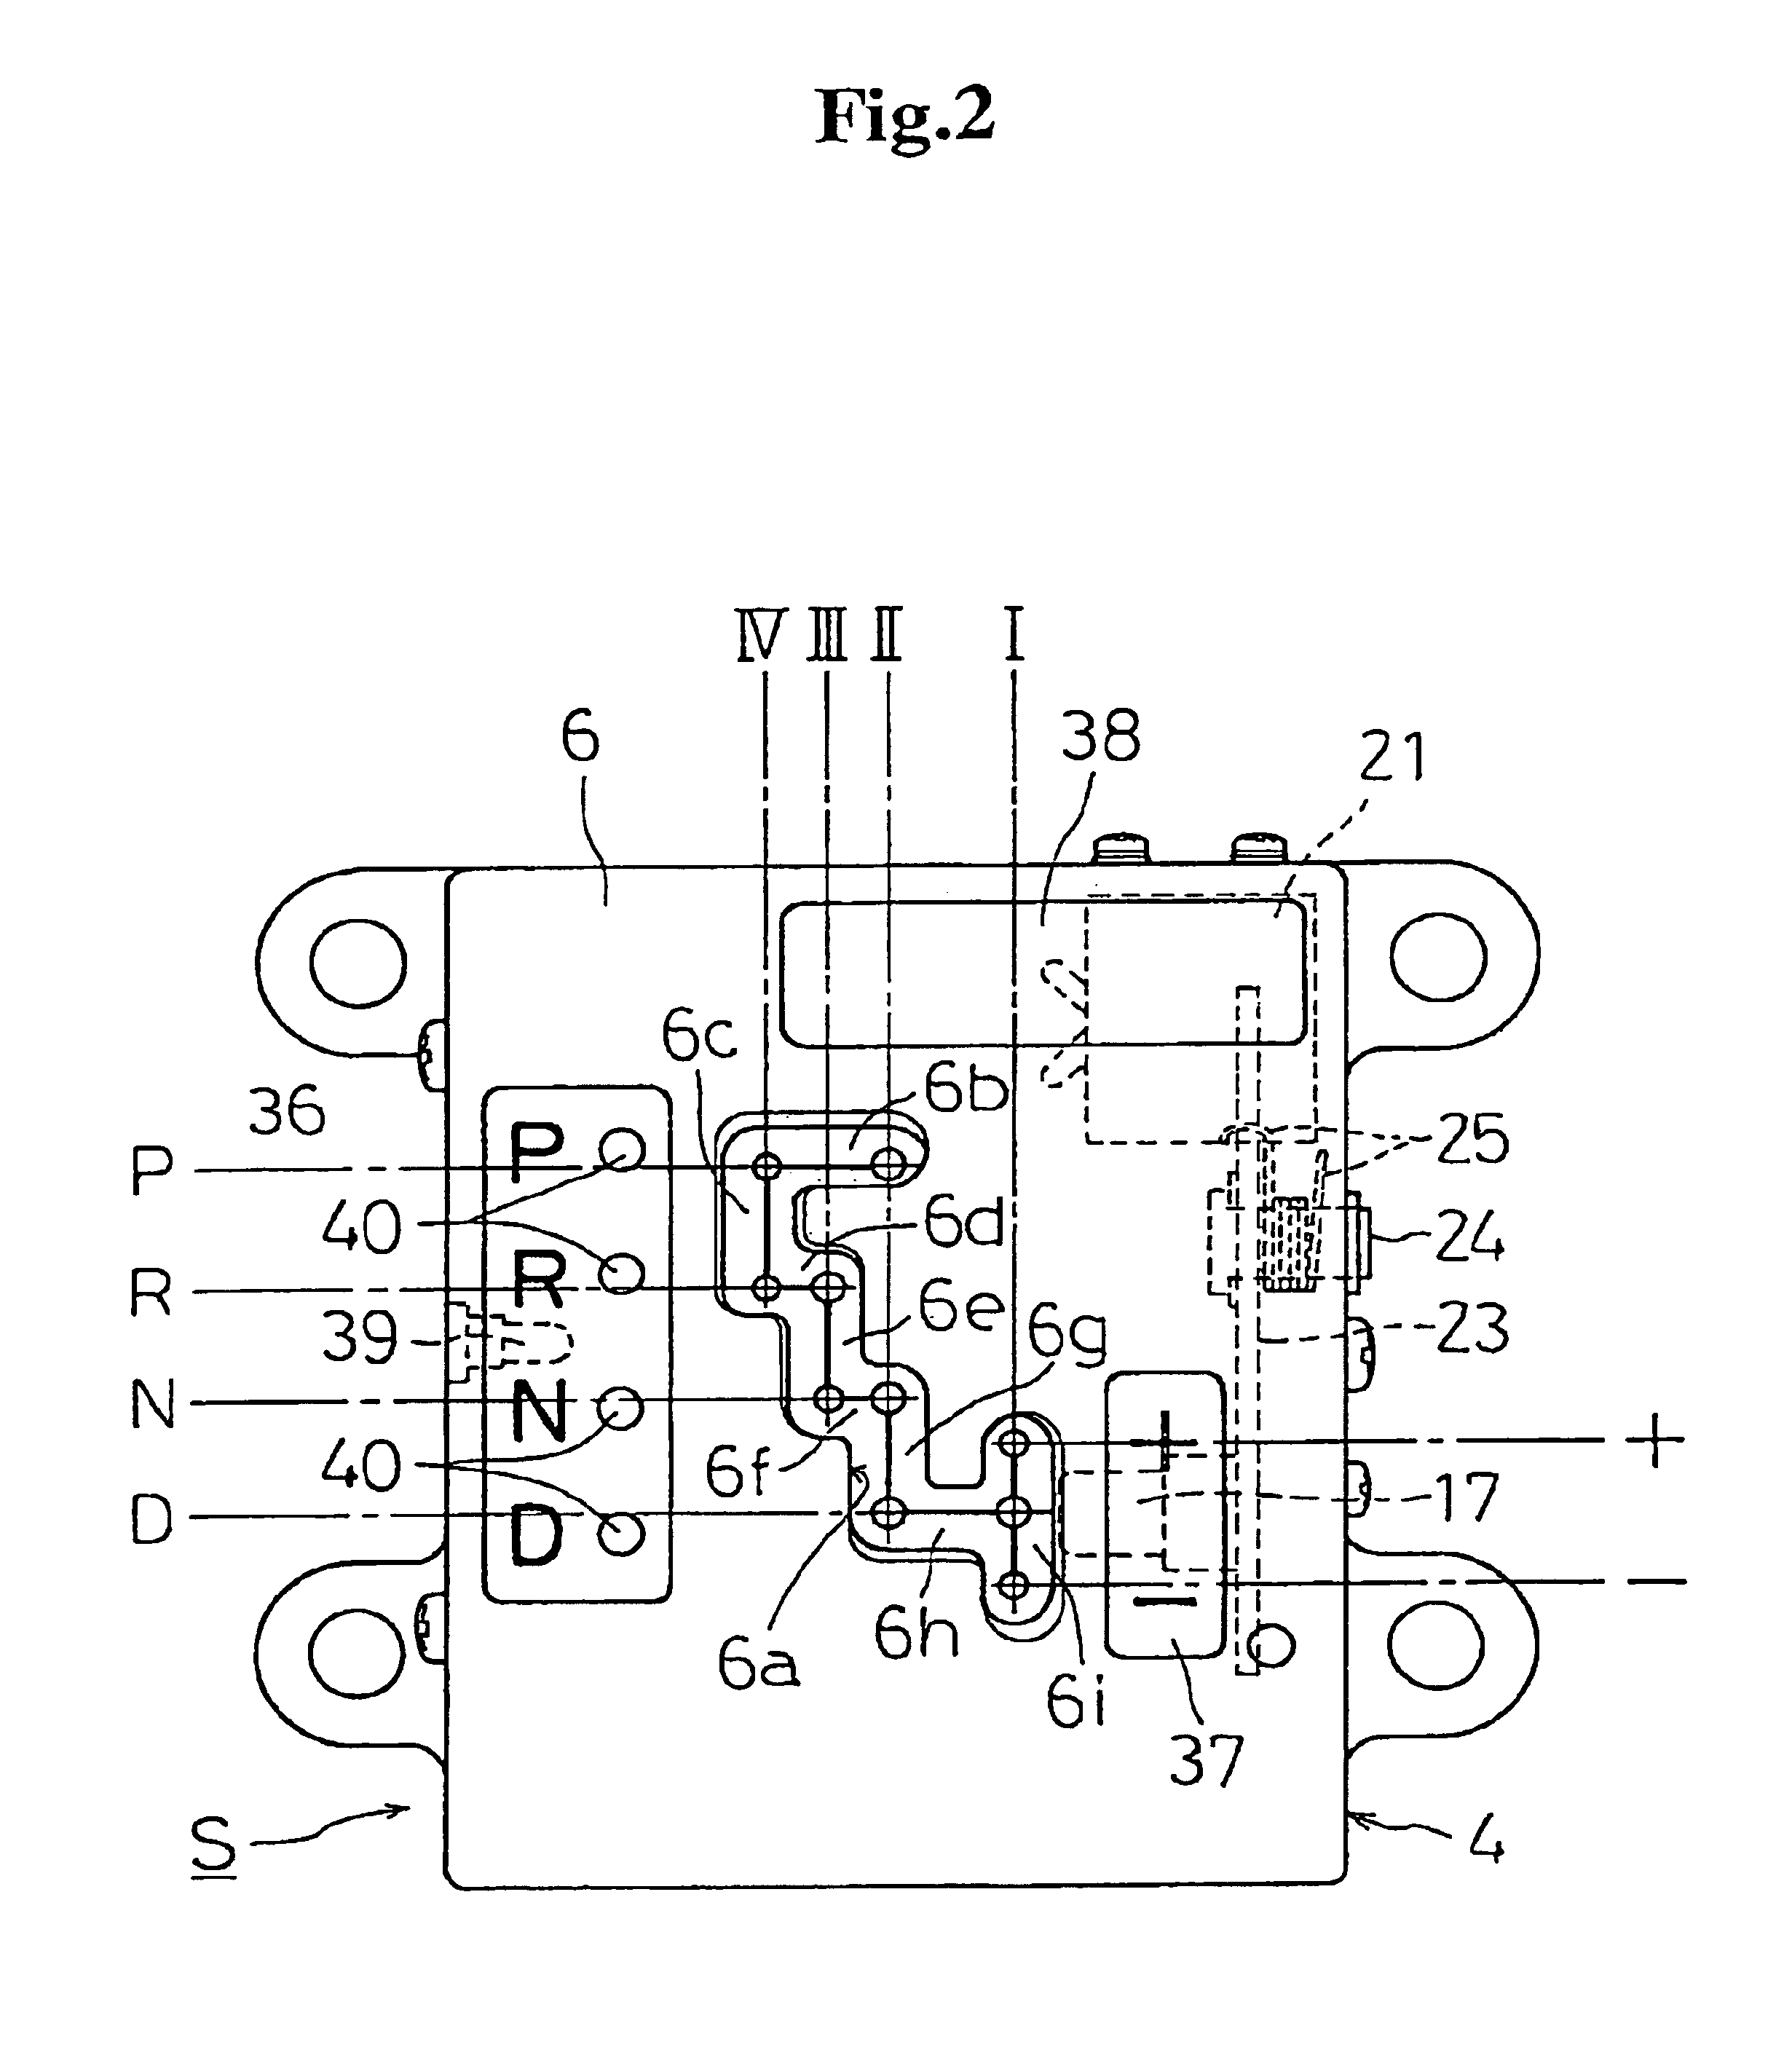 Shift manipulating device for an automatic transmission